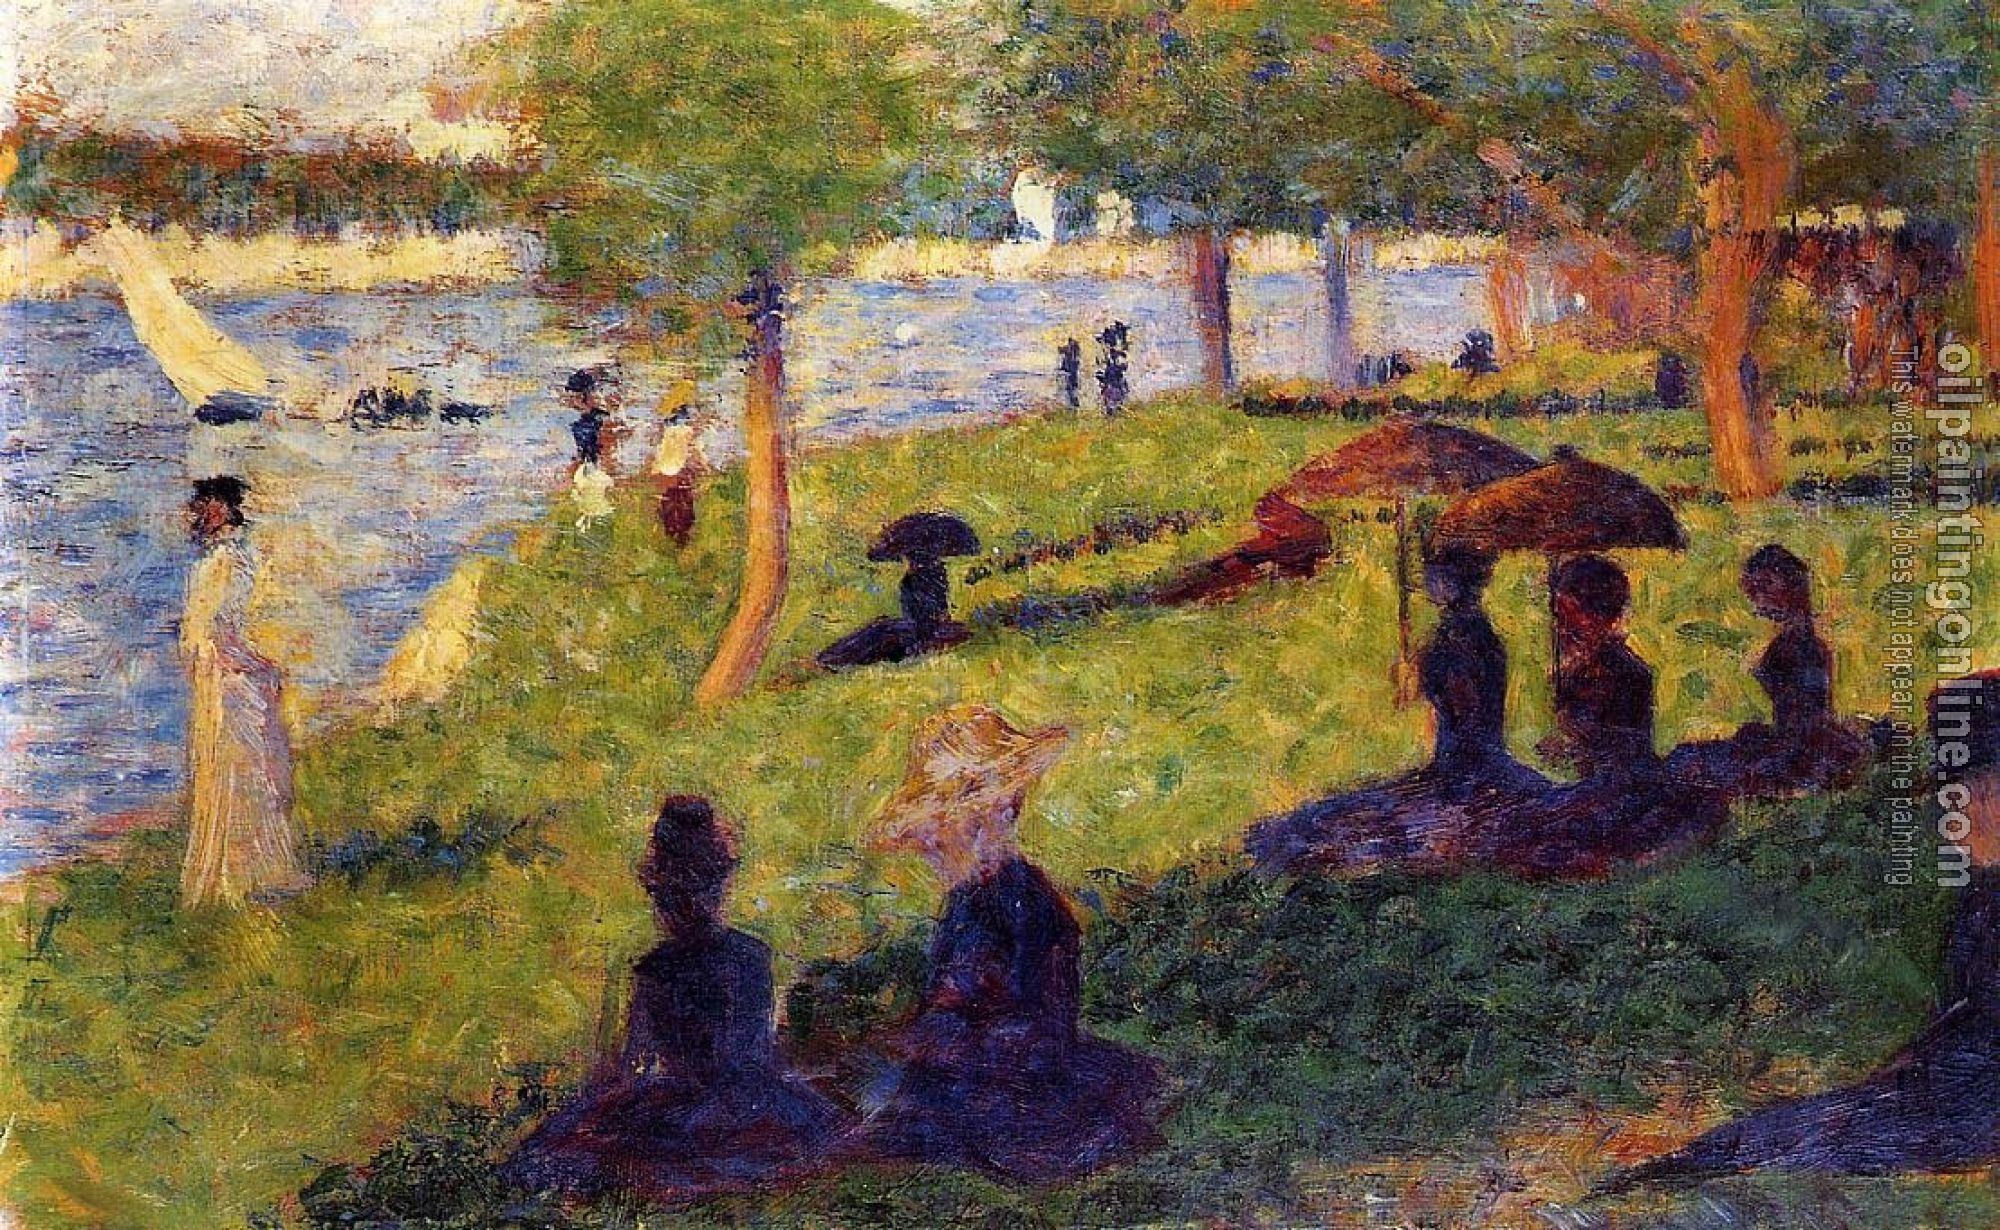 Seurat, Georges - La Grande Jatte, Woman Fishing and Seated Figures